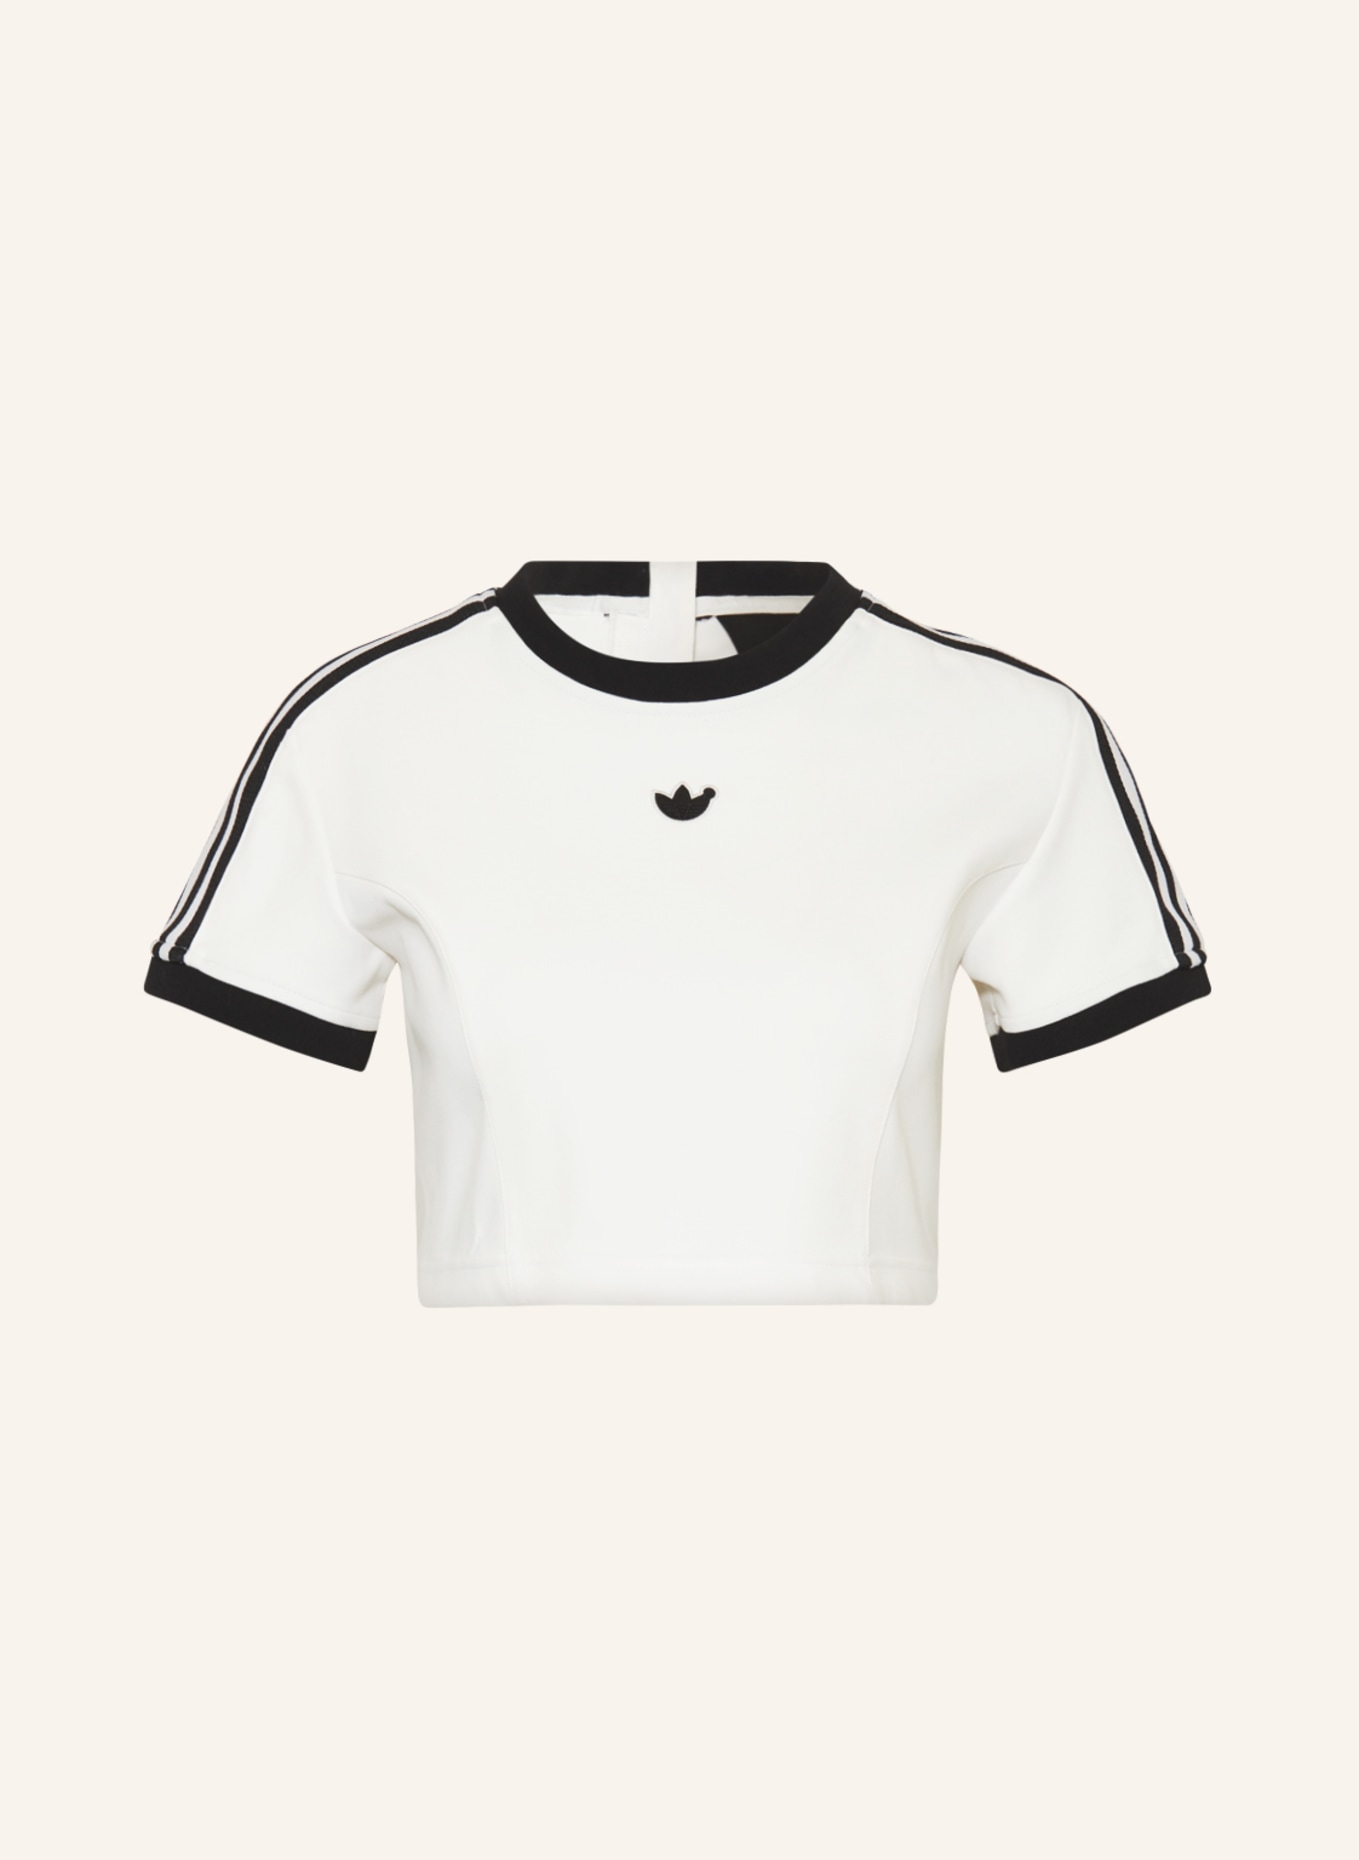 adidas Blue Version Cropped white shirt in